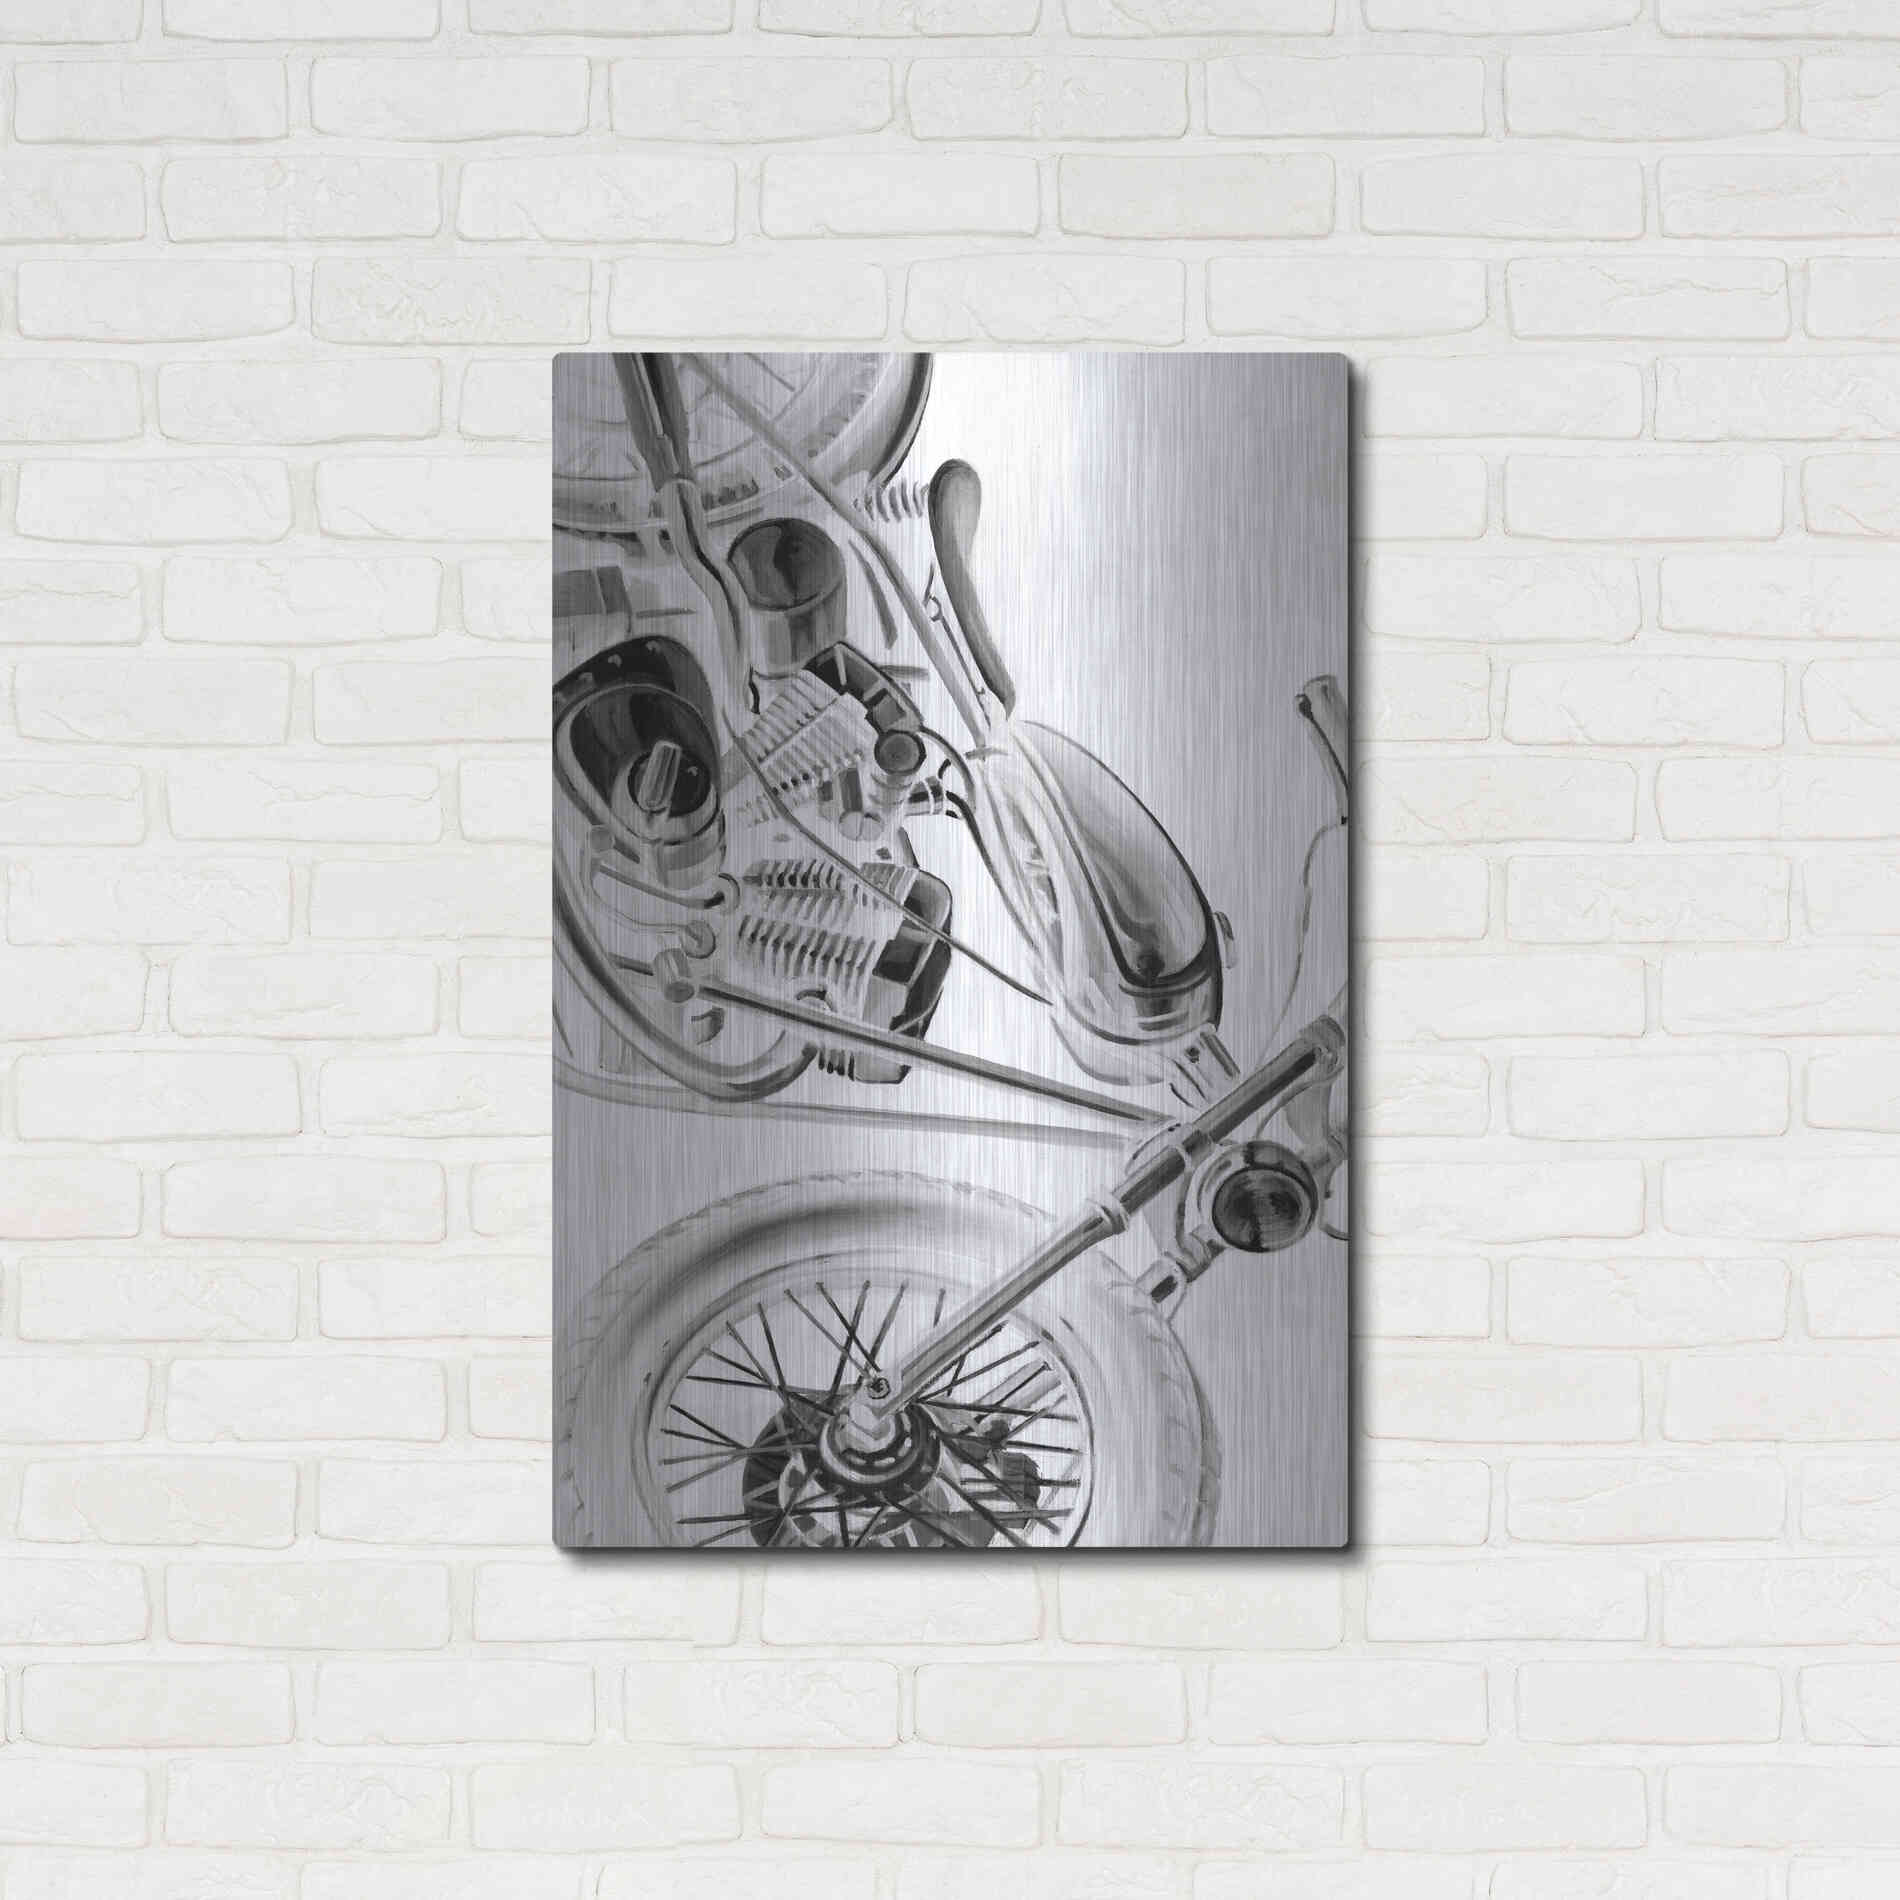 Luxe Metal Art 'Inverted Vintage Motorcycle I' by Ethan Harper, Metal Wall Art,24x36